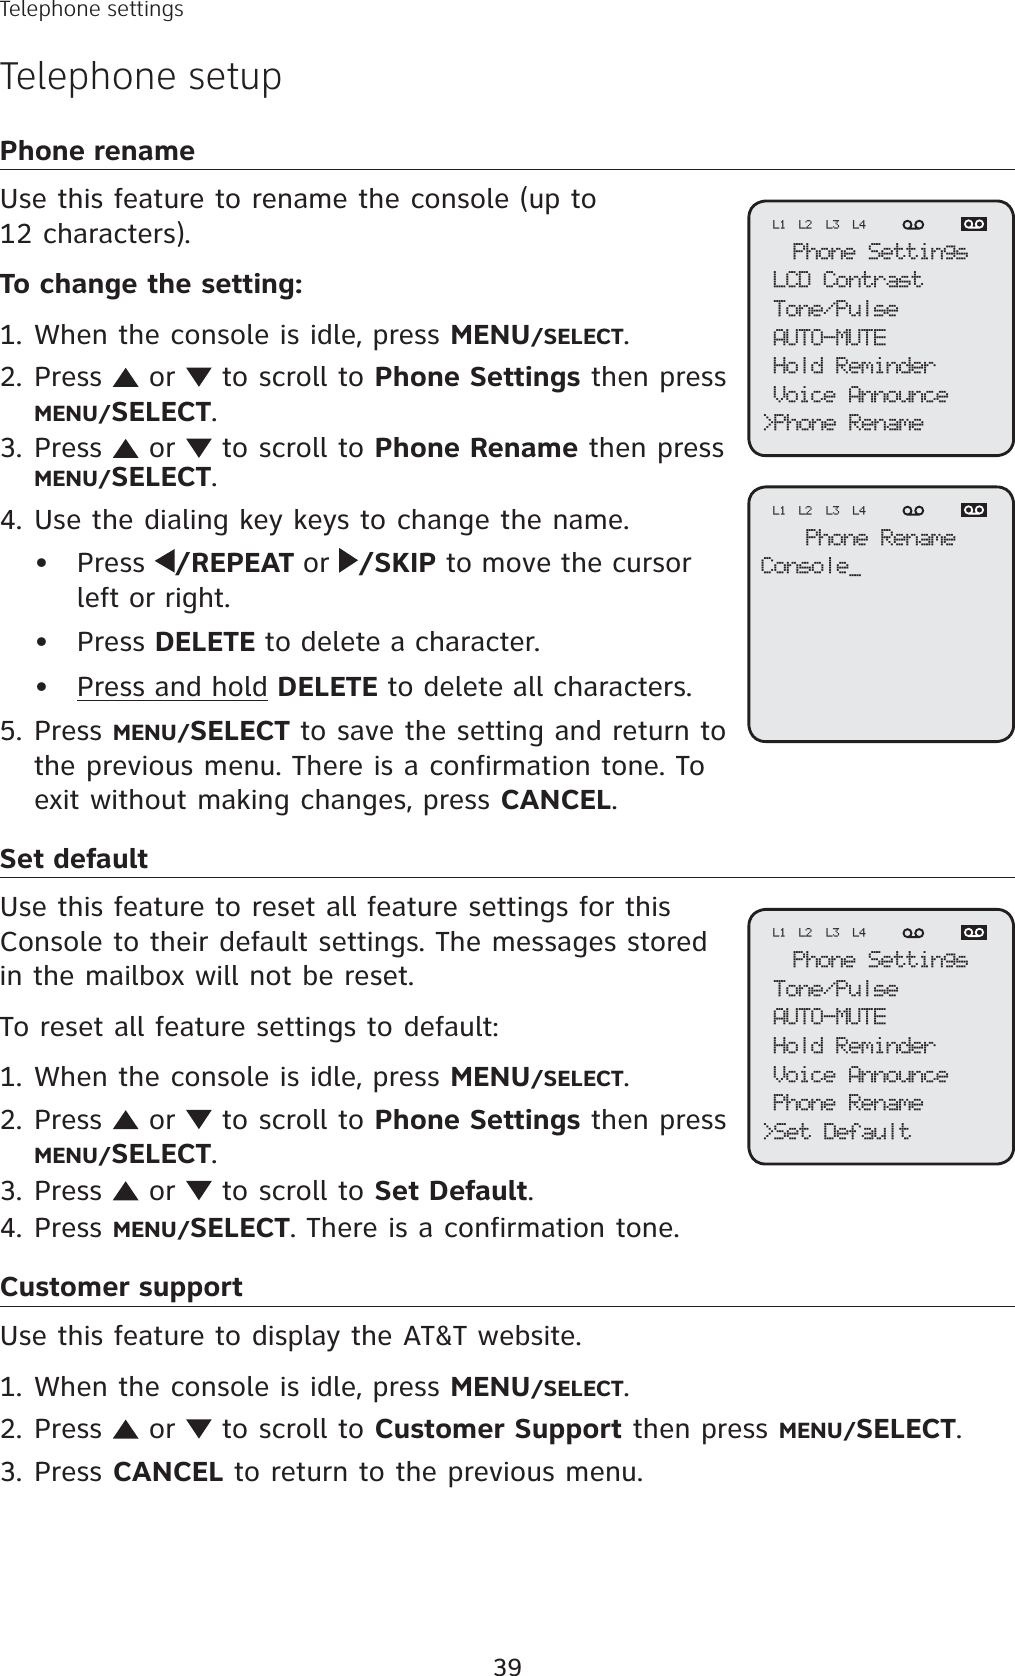 39Telephone settingsTelephone setupPhone renameUse this feature to rename the console (up to 12 characters).To change the setting:When the console is idle, press MENU/SELECT.Press   or   to scroll to Phone Settings then press MENU/SELECT.Press   or   to scroll to Phone Rename then press MENU/SELECT.Use the dialing key keys to change the name.Press  /REPEAT or /SKIP to move the cursor left or right.Press DELETE to delete a character.Press and hold DELETE to delete all characters.Press MENU/SELECT to save the setting and return to the previous menu. There is a confirmation tone. To exit without making changes, press CANCEL.Set defaultUse this feature to reset all feature settings for this Console to their default settings. The messages stored in the mailbox will not be reset.To reset all feature settings to default:When the console is idle, press MENU/SELECT.Press   or   to scroll to Phone Settings then pressMENU/SELECT.Press   or   to scroll to Set Default.Press MENU/SELECT. There is a confirmation tone.Customer supportUse this feature to display the AT&amp;T website.When the console is idle, press MENU/SELECT.Press   or   to scroll to Customer Support then press MENU/SELECT.Press CANCEL to return to the previous menu.1.2.3.4.•••5.1.2.3.4.1.2.3.Phone SettingsLCD ContrastTone/PulseAUTO-MUTEHold ReminderVoice Announce&gt;Phone RenameL1 L2 L3 L4Phone RenameConsole_L1 L2 L3 L4Phone SettingsTone/PulseAUTO-MUTEHold ReminderVoice AnnouncePhone Rename&gt;Set DefaultL1 L2 L3 L4